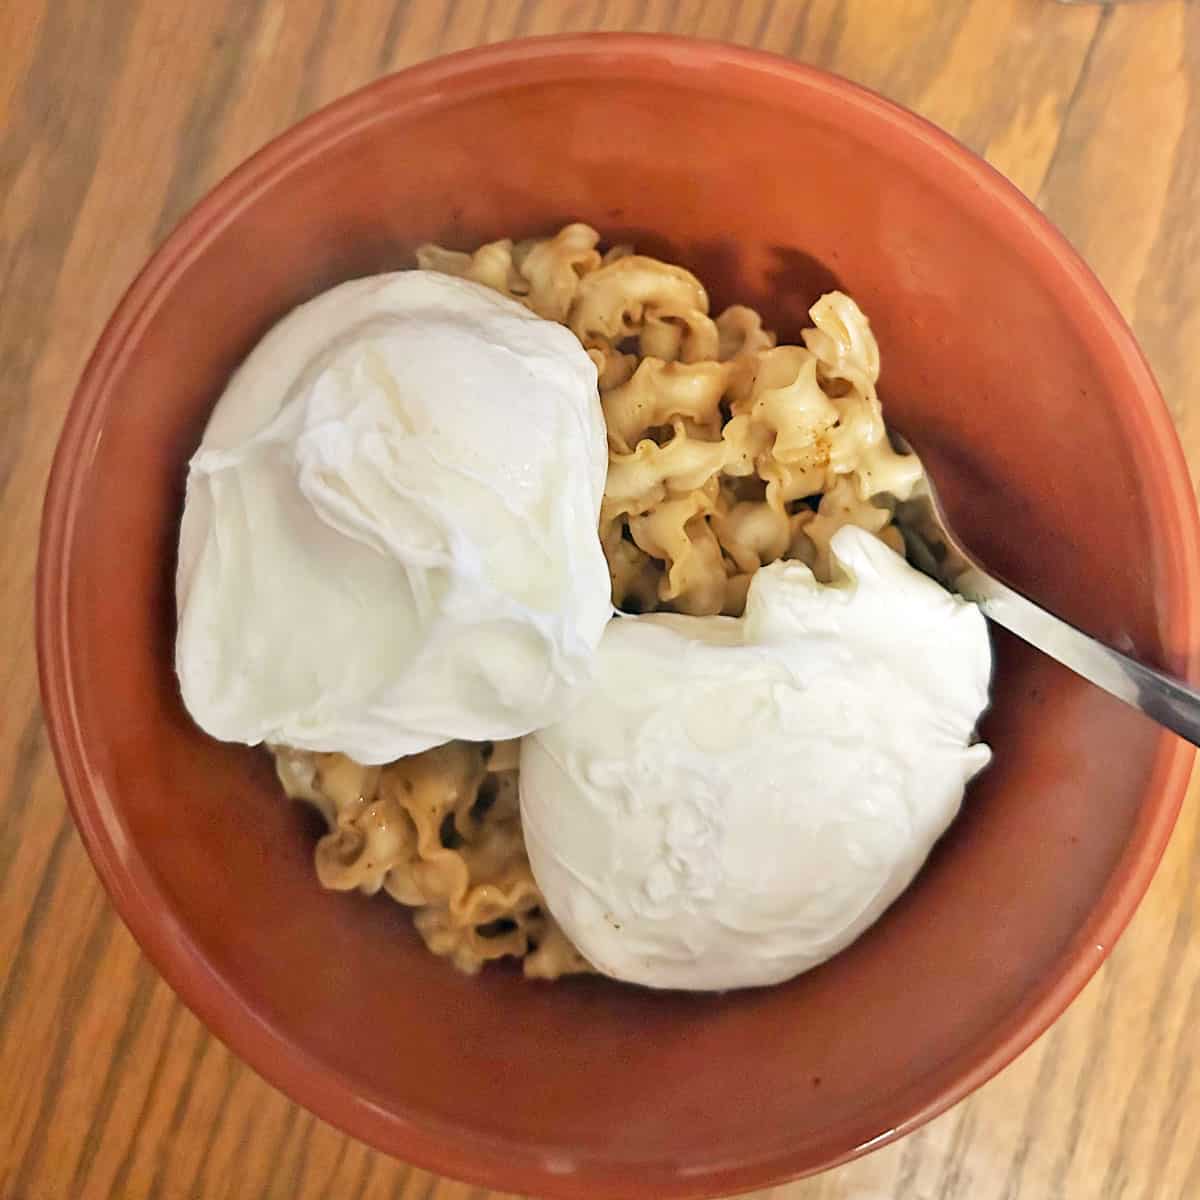 Two poached eggs on top of noodles in a bowl.